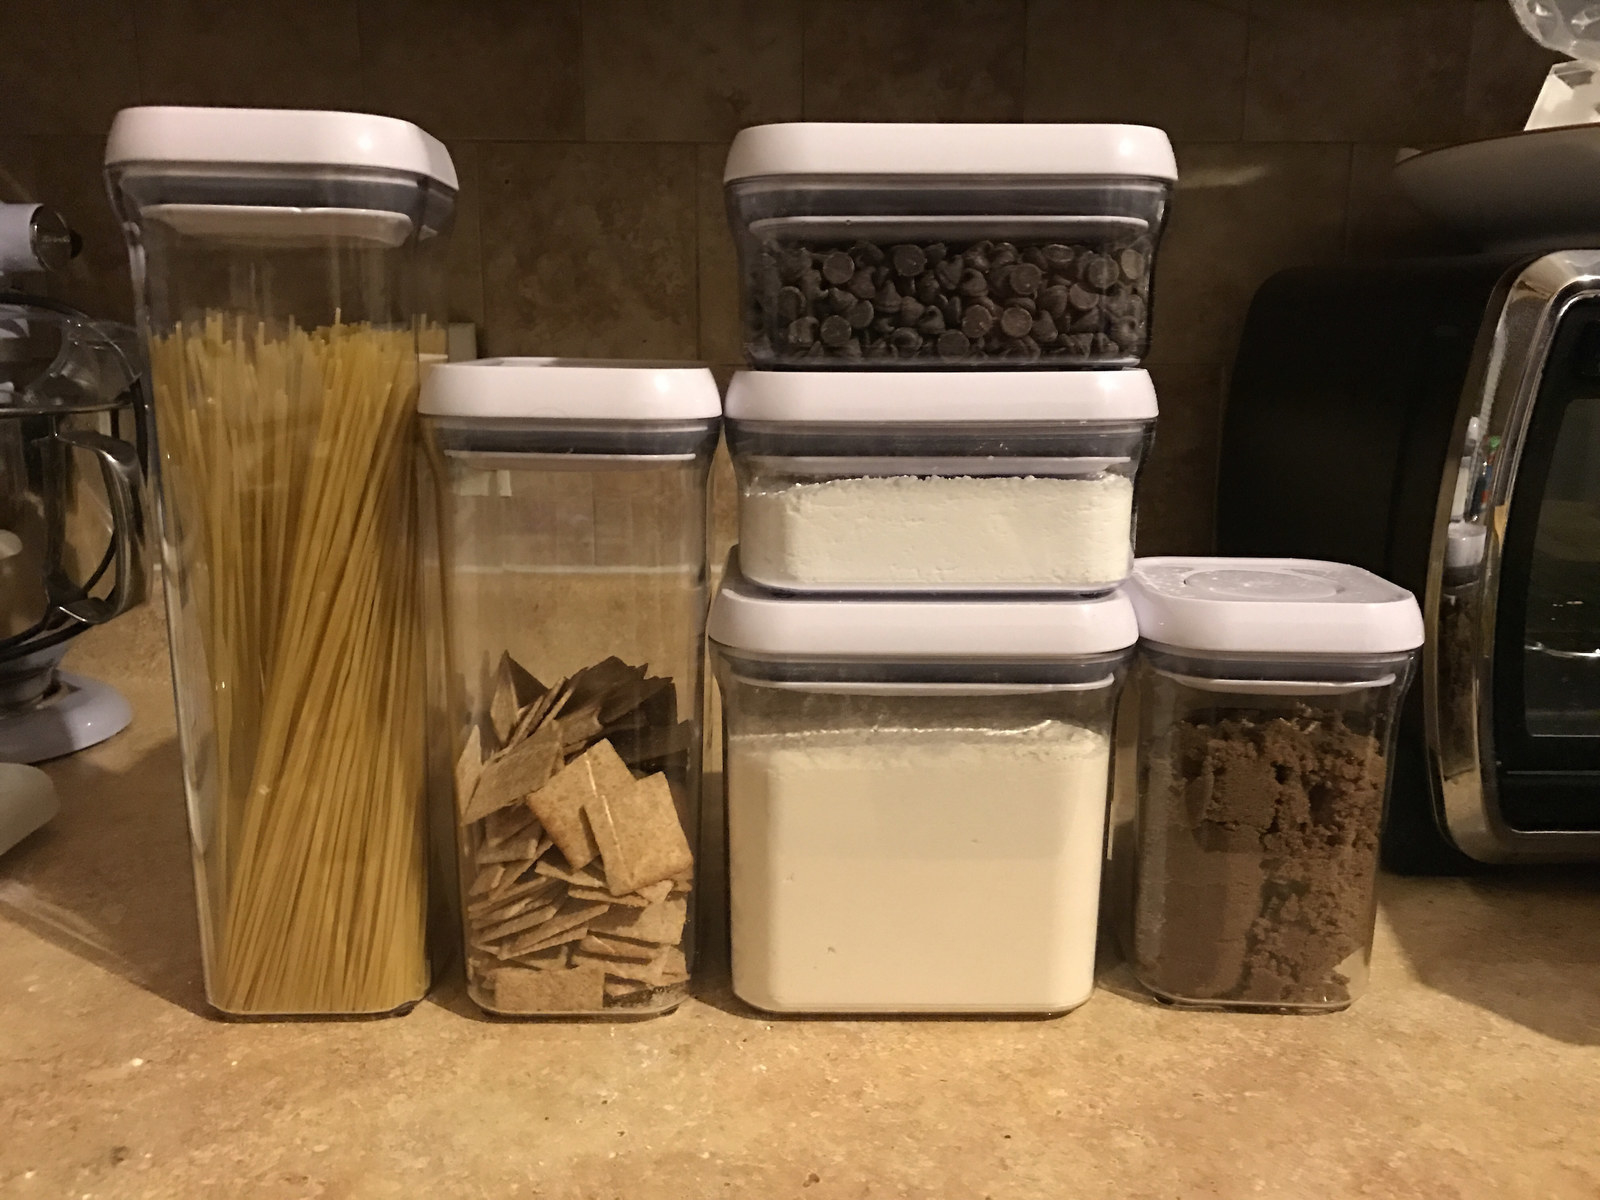 Six OXO Pop Containers of various sizes filled with a mix of dry ingredients from pasta to chocolate chips